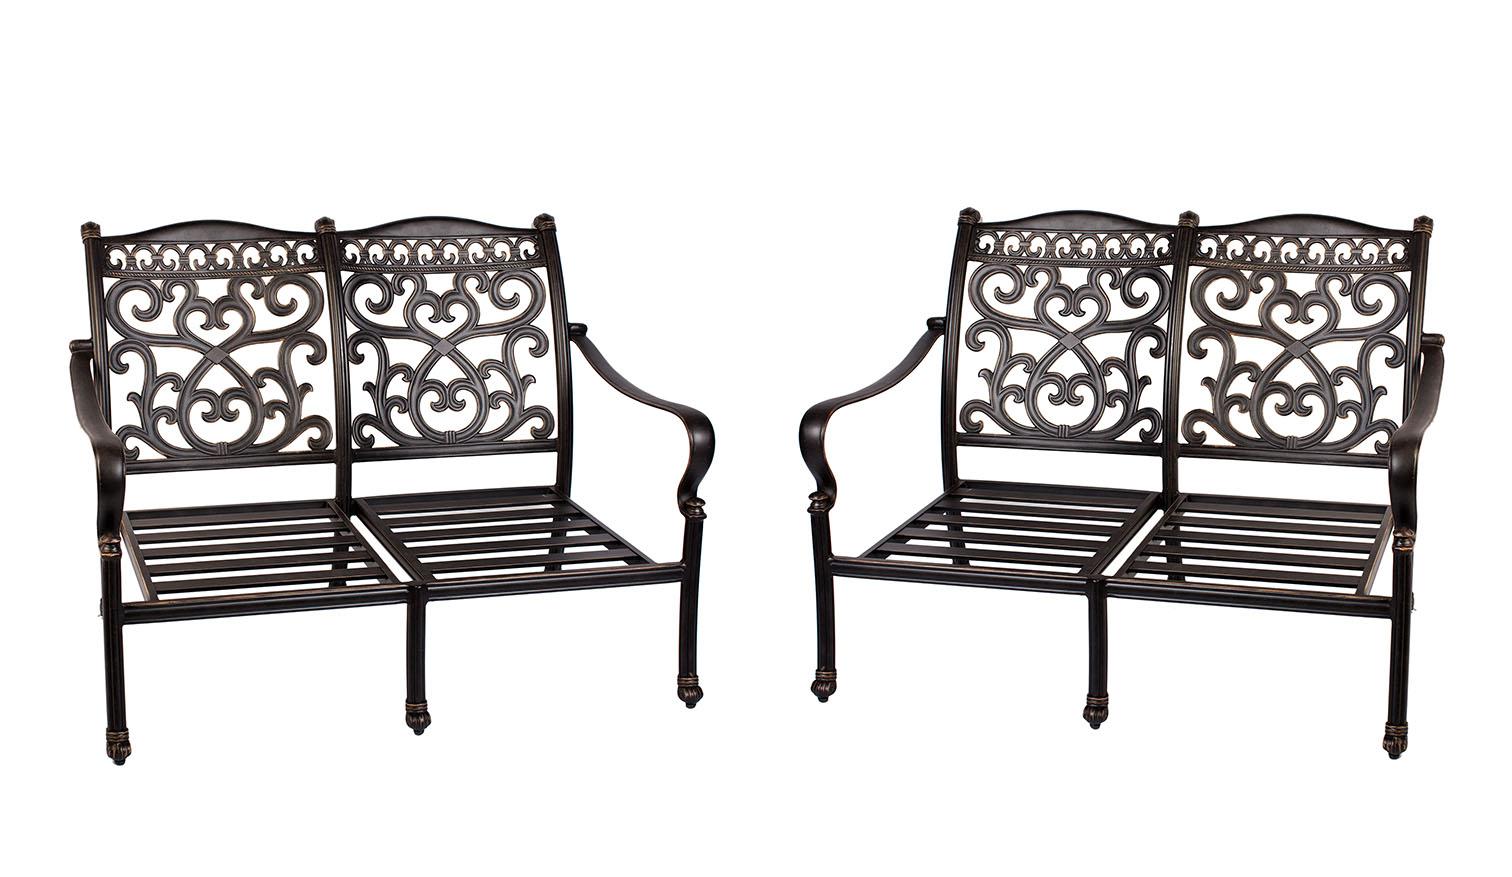 

    
Alexis Cast Aluminum  Deep Seat Loveseat High Back w/ Natural Sunbrella Cushion Set of 2 by CaliPatio SPECIAL ORDER
